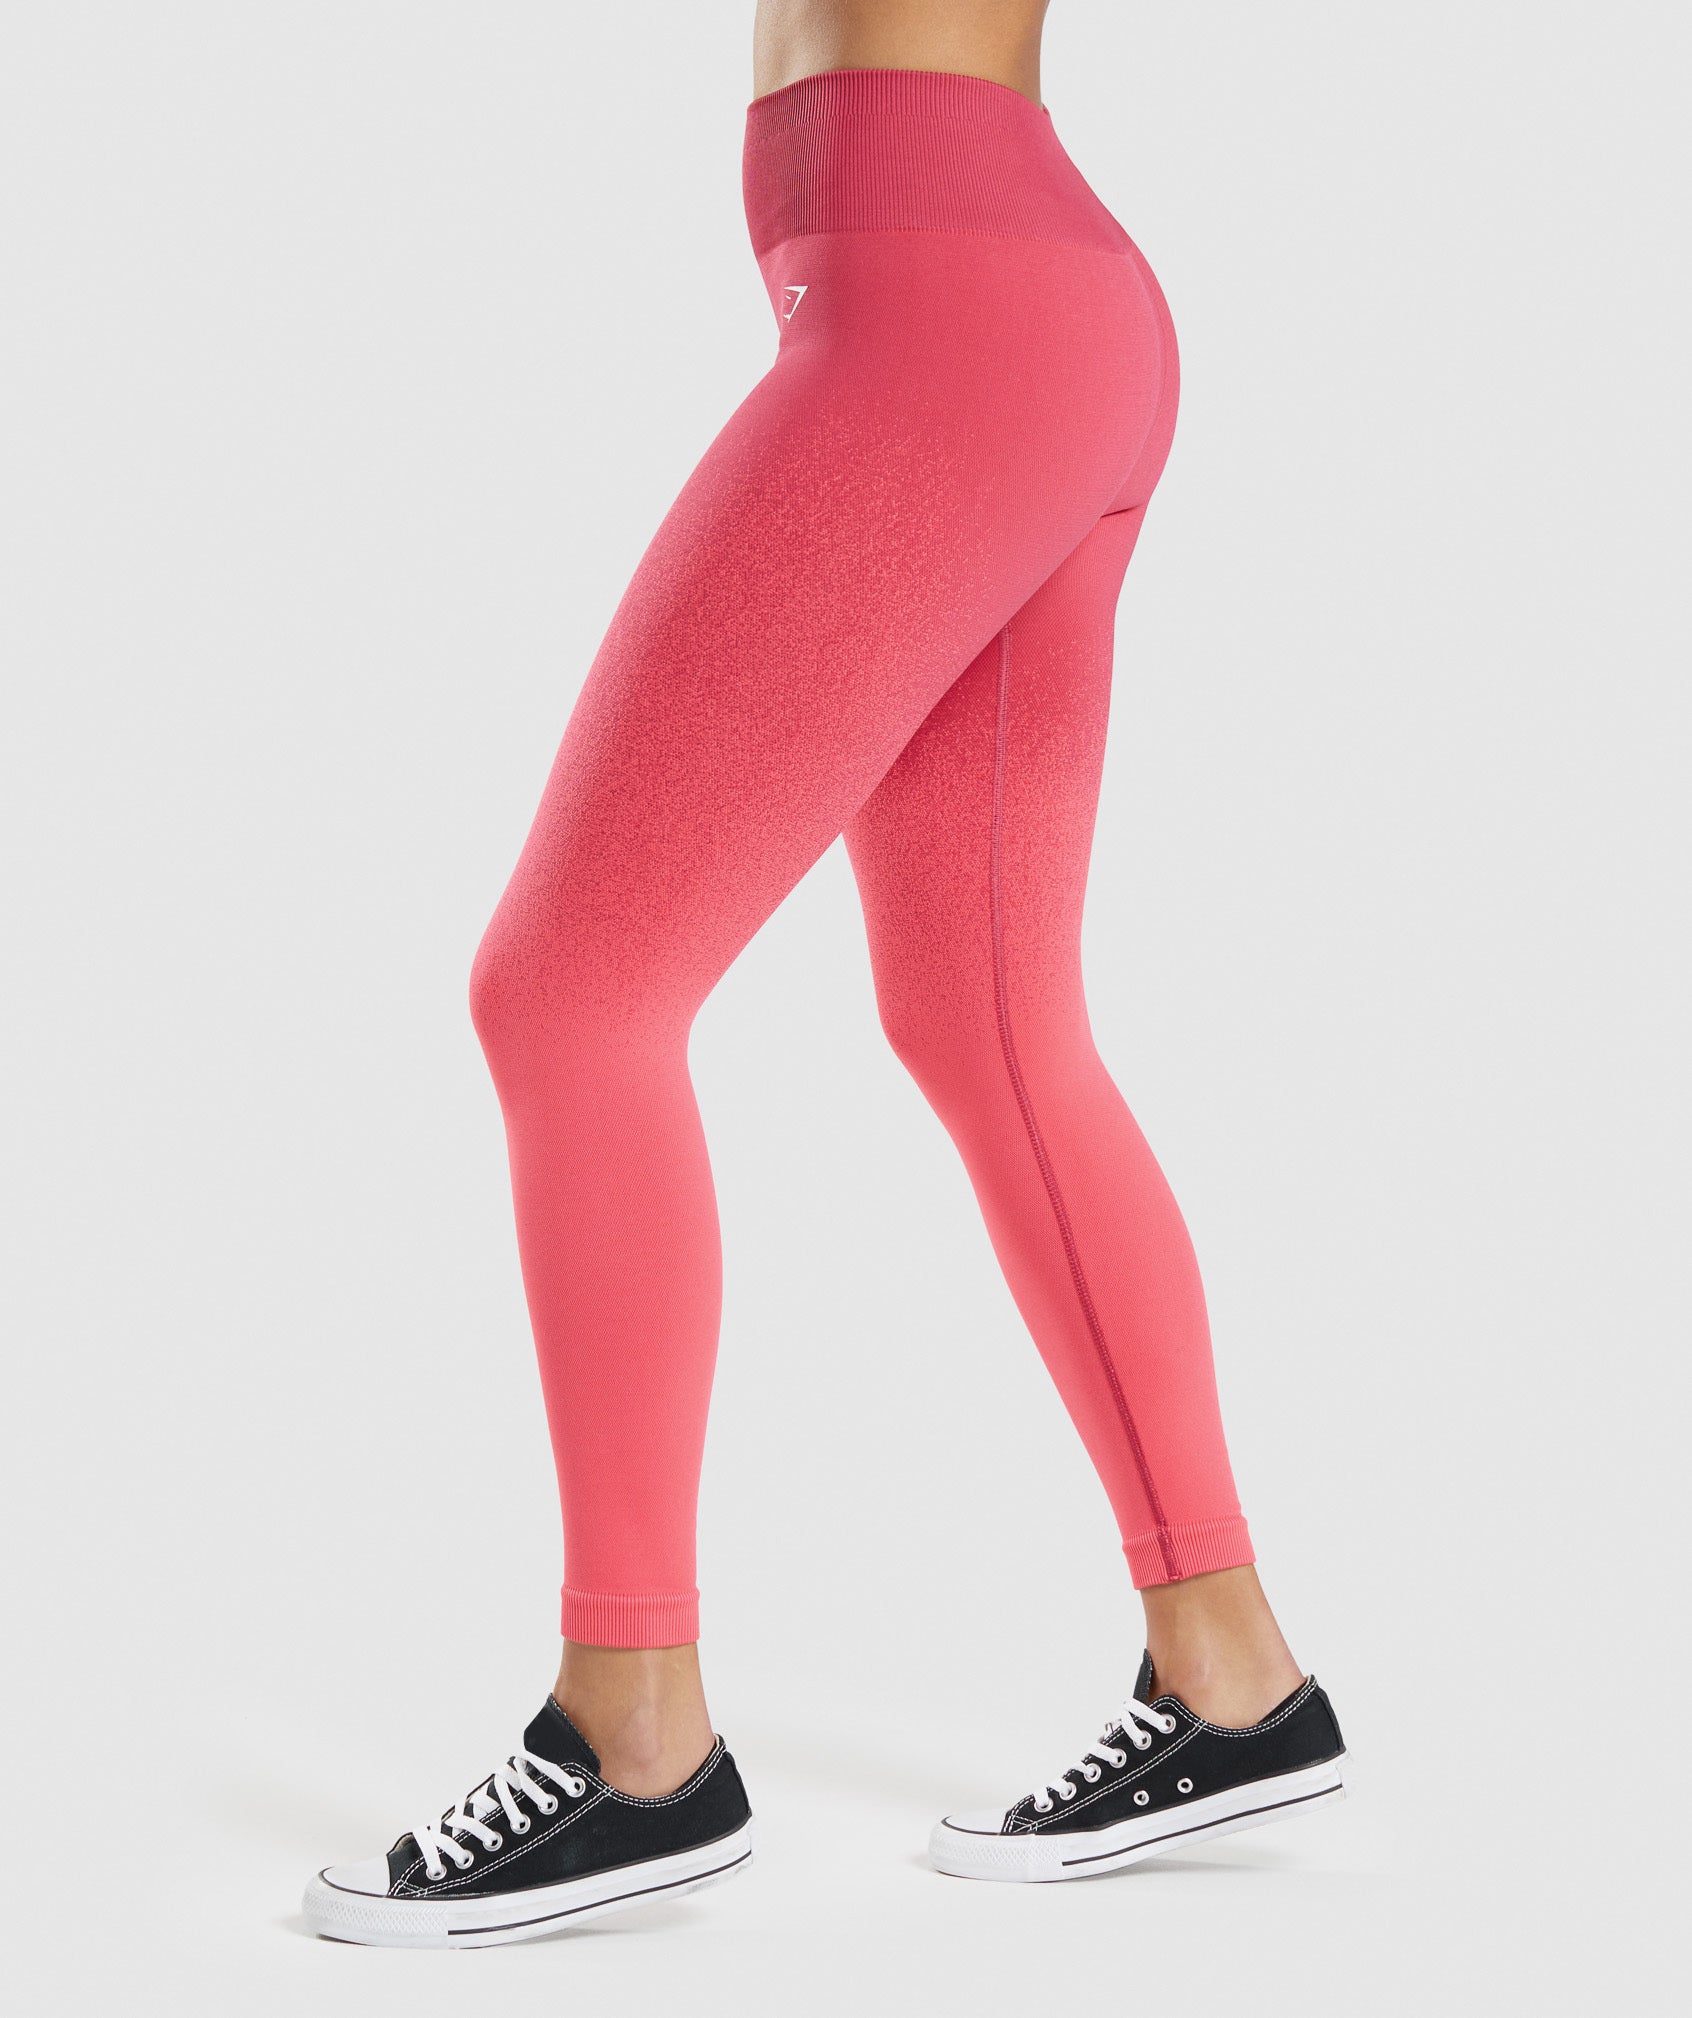 gymshark red marl leggings gym (more of a coral)